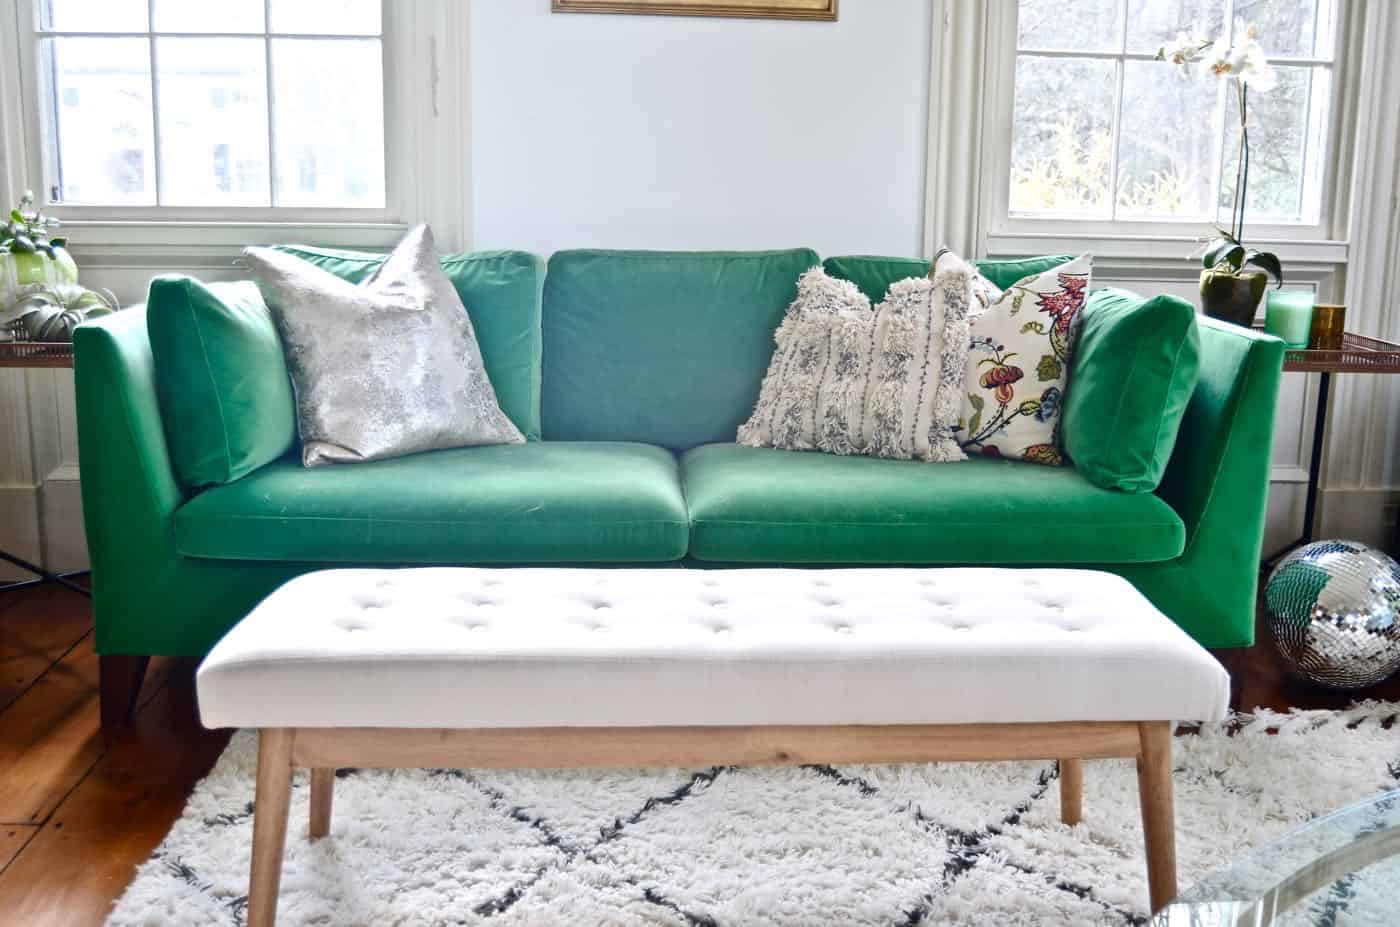 green Pantone color of the year used in decorating.